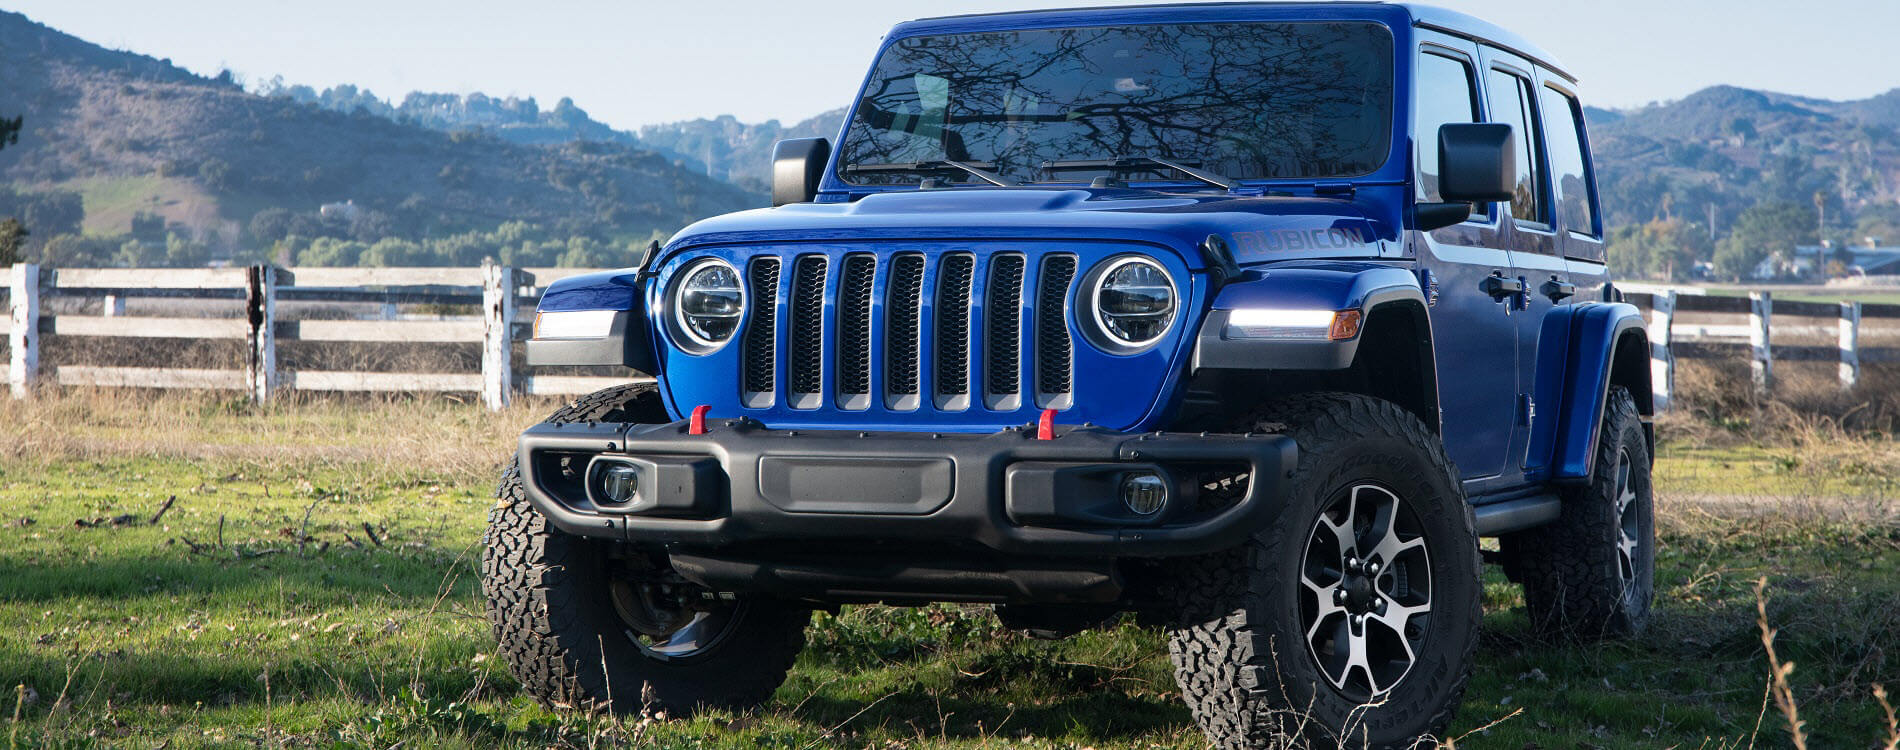 2021 Jeep Wrangler Review | Fremont Motor Company WY